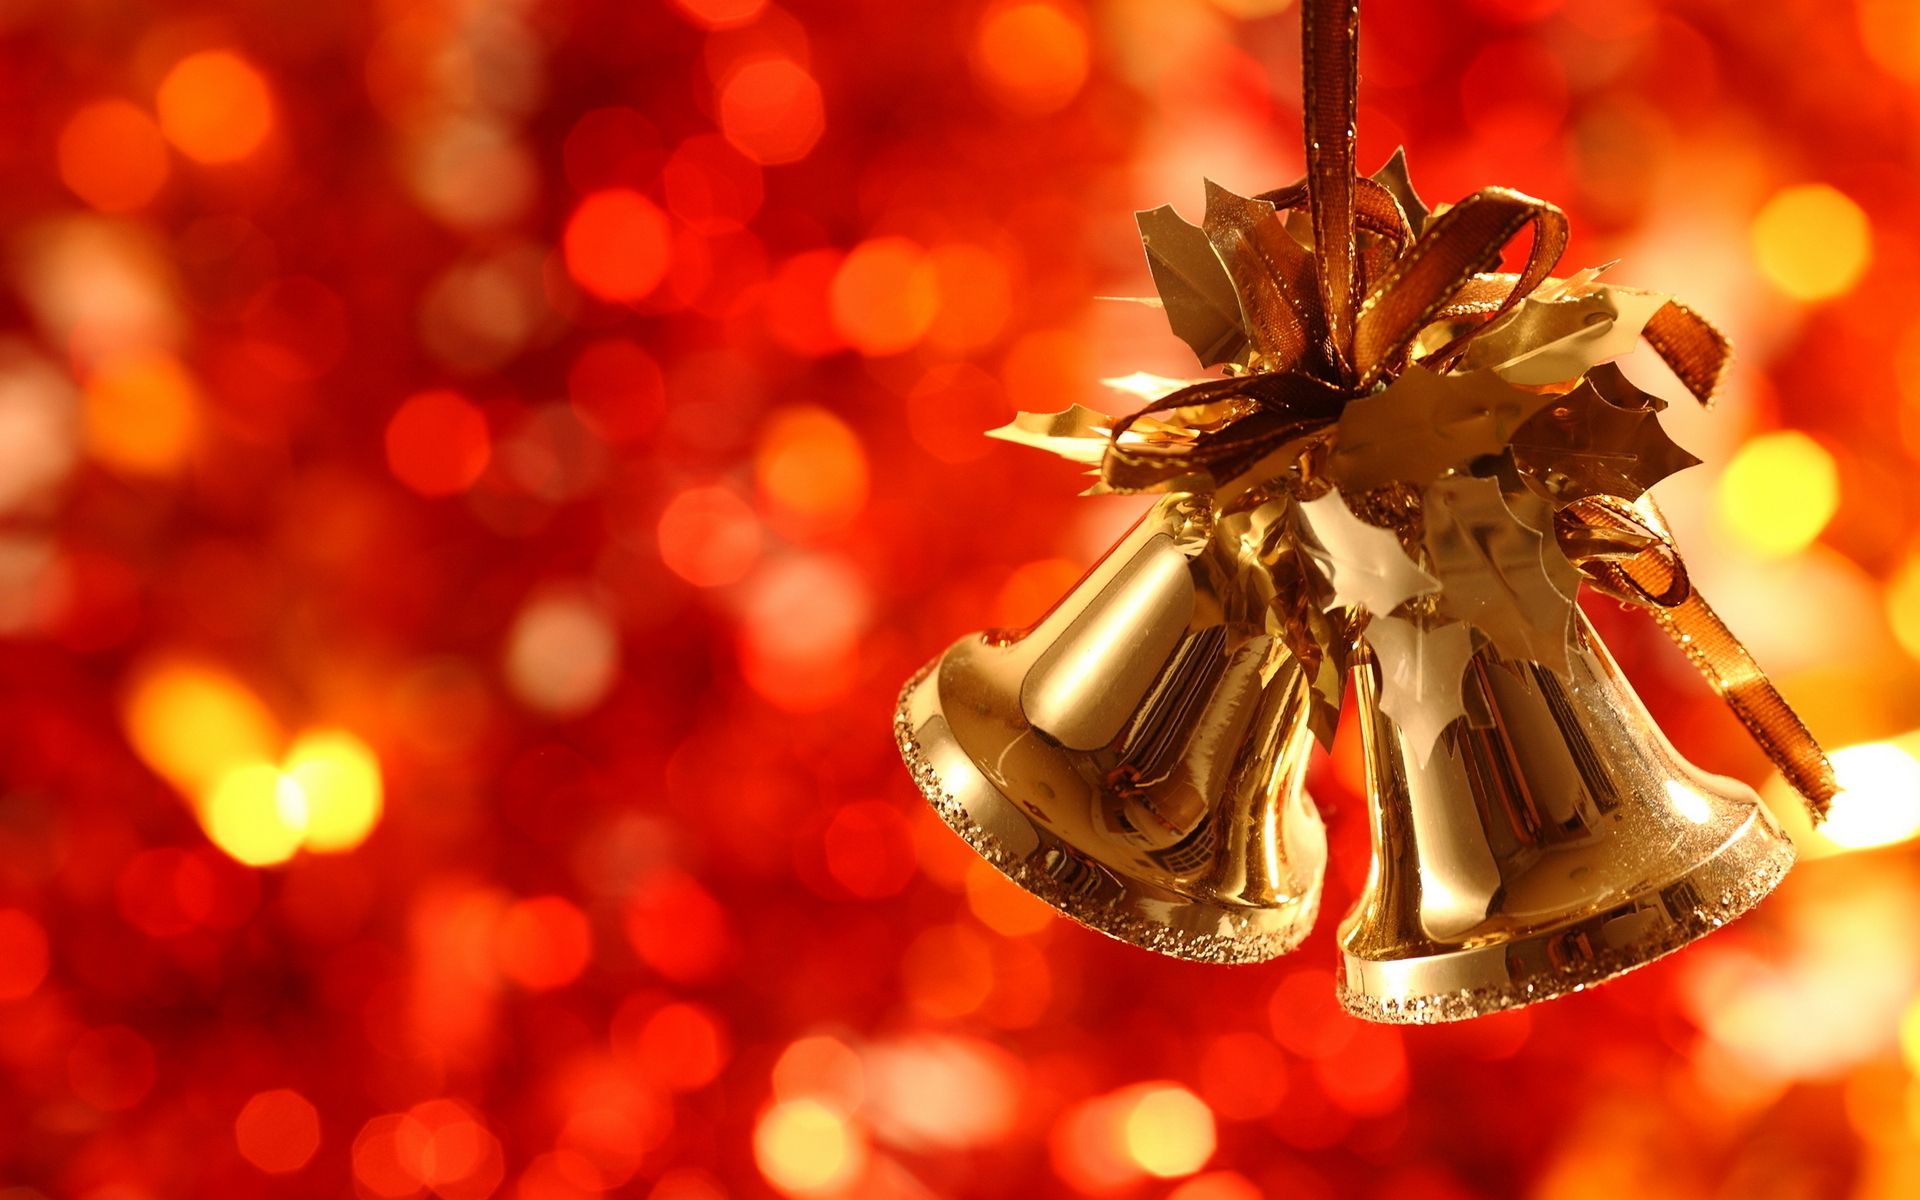 2015 Christmas computer background - wallpapers, images, photos ...